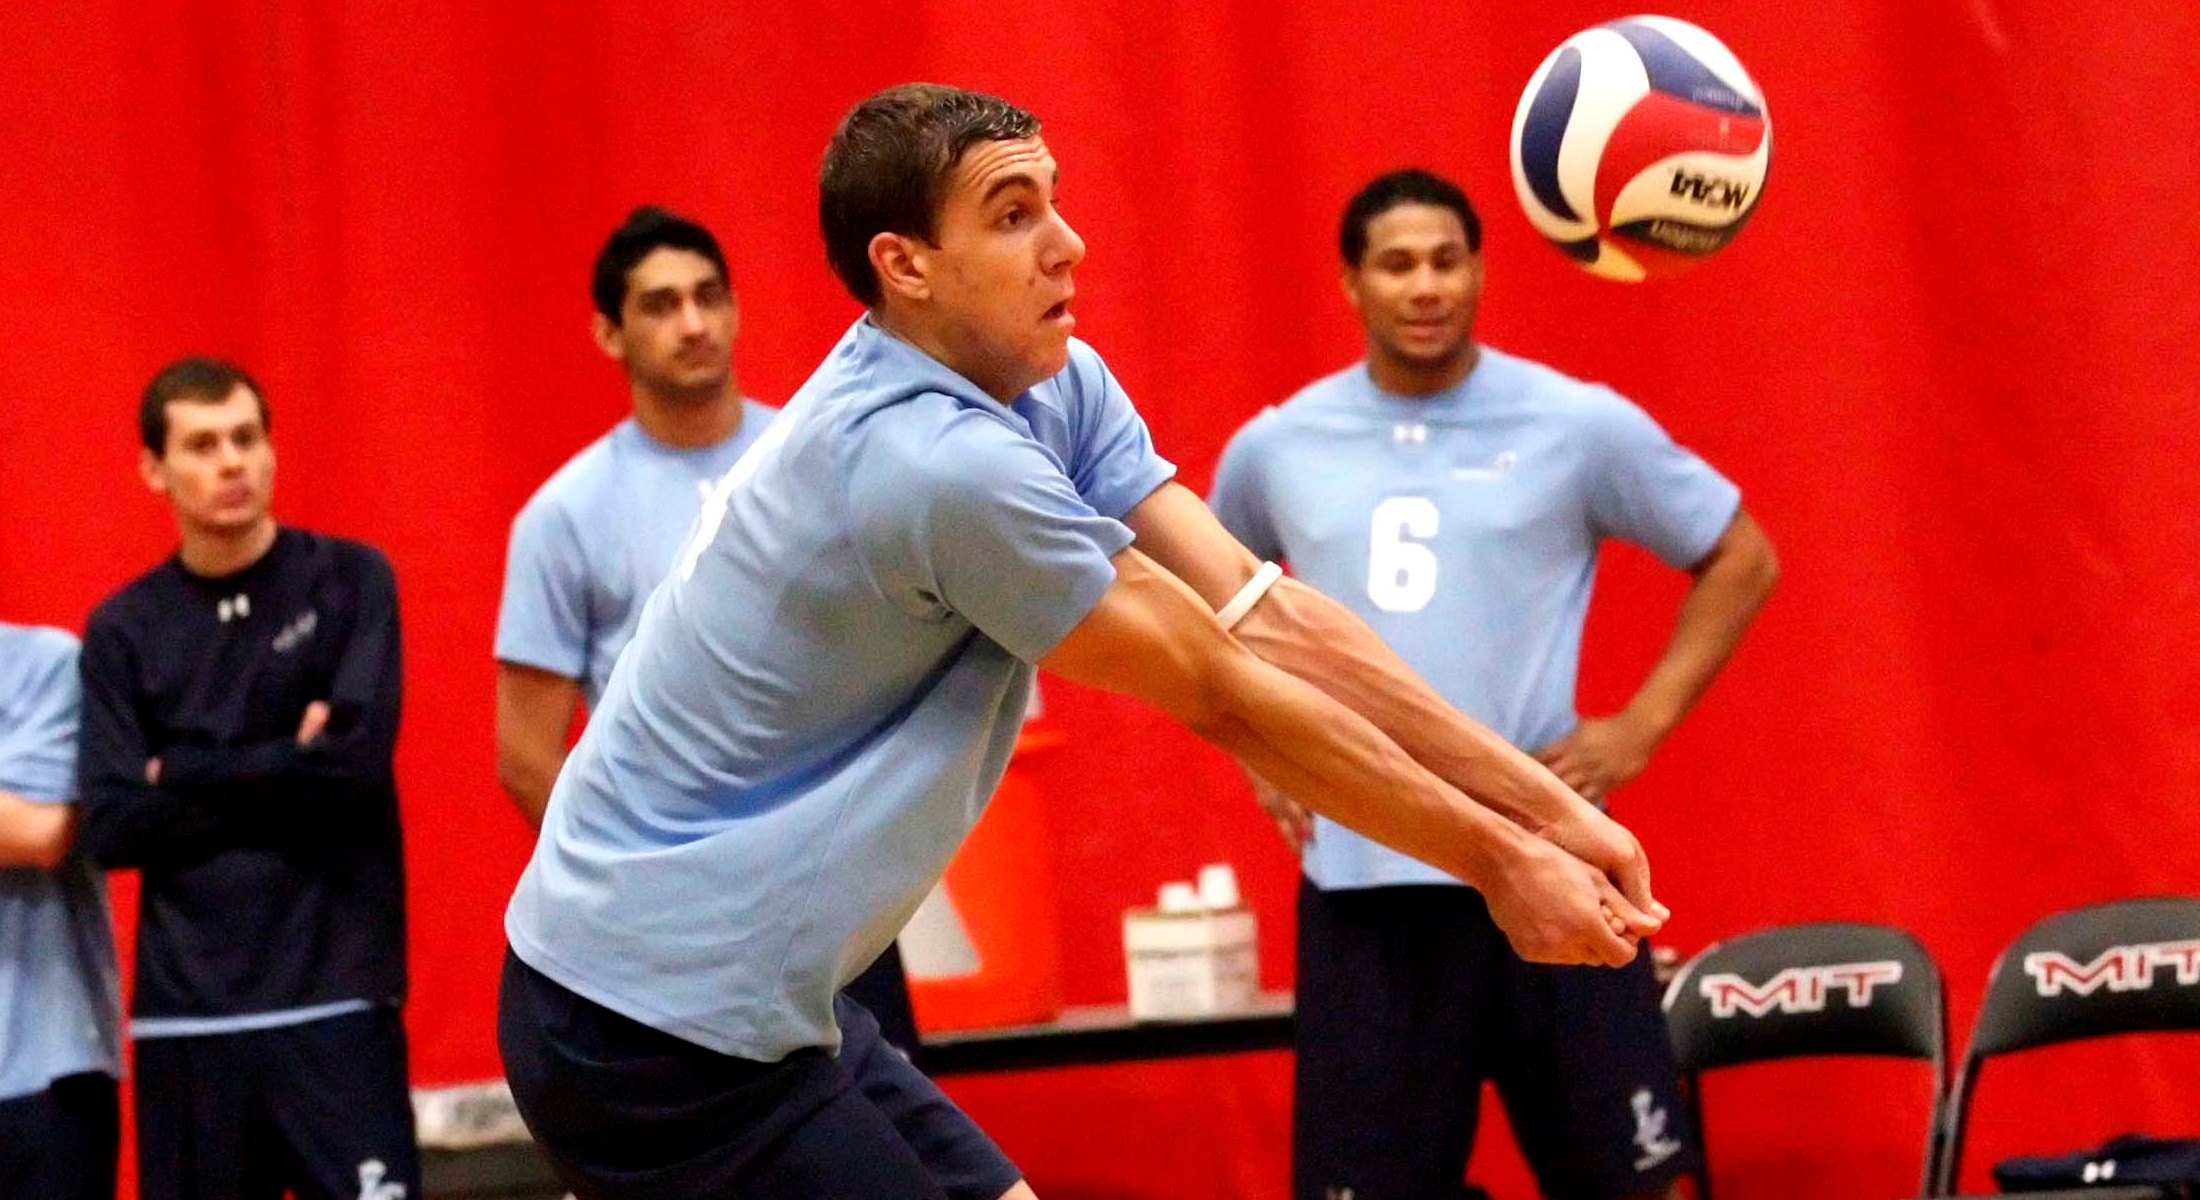 Men's Volleyball Clipped at Wentworth